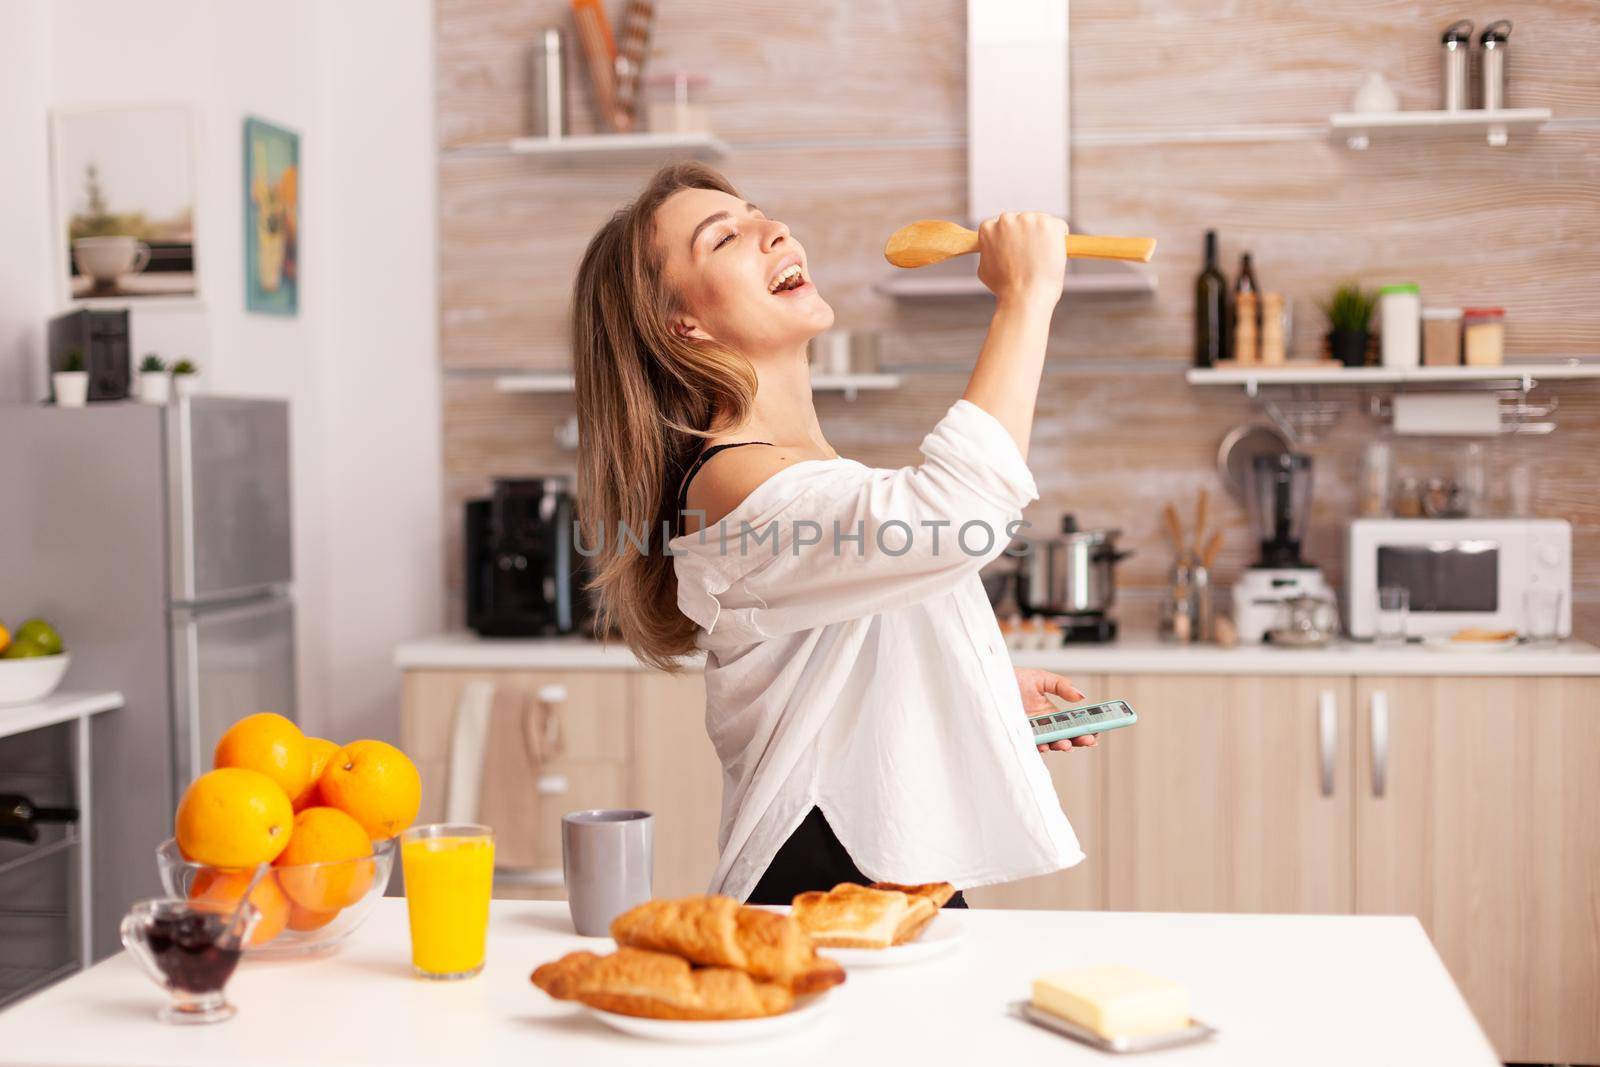 Woman singing during breakfast in home kitchen wearing sexy lingerie. Seductive woman with tattoos using smartphone wearing temping underwear in the morning.